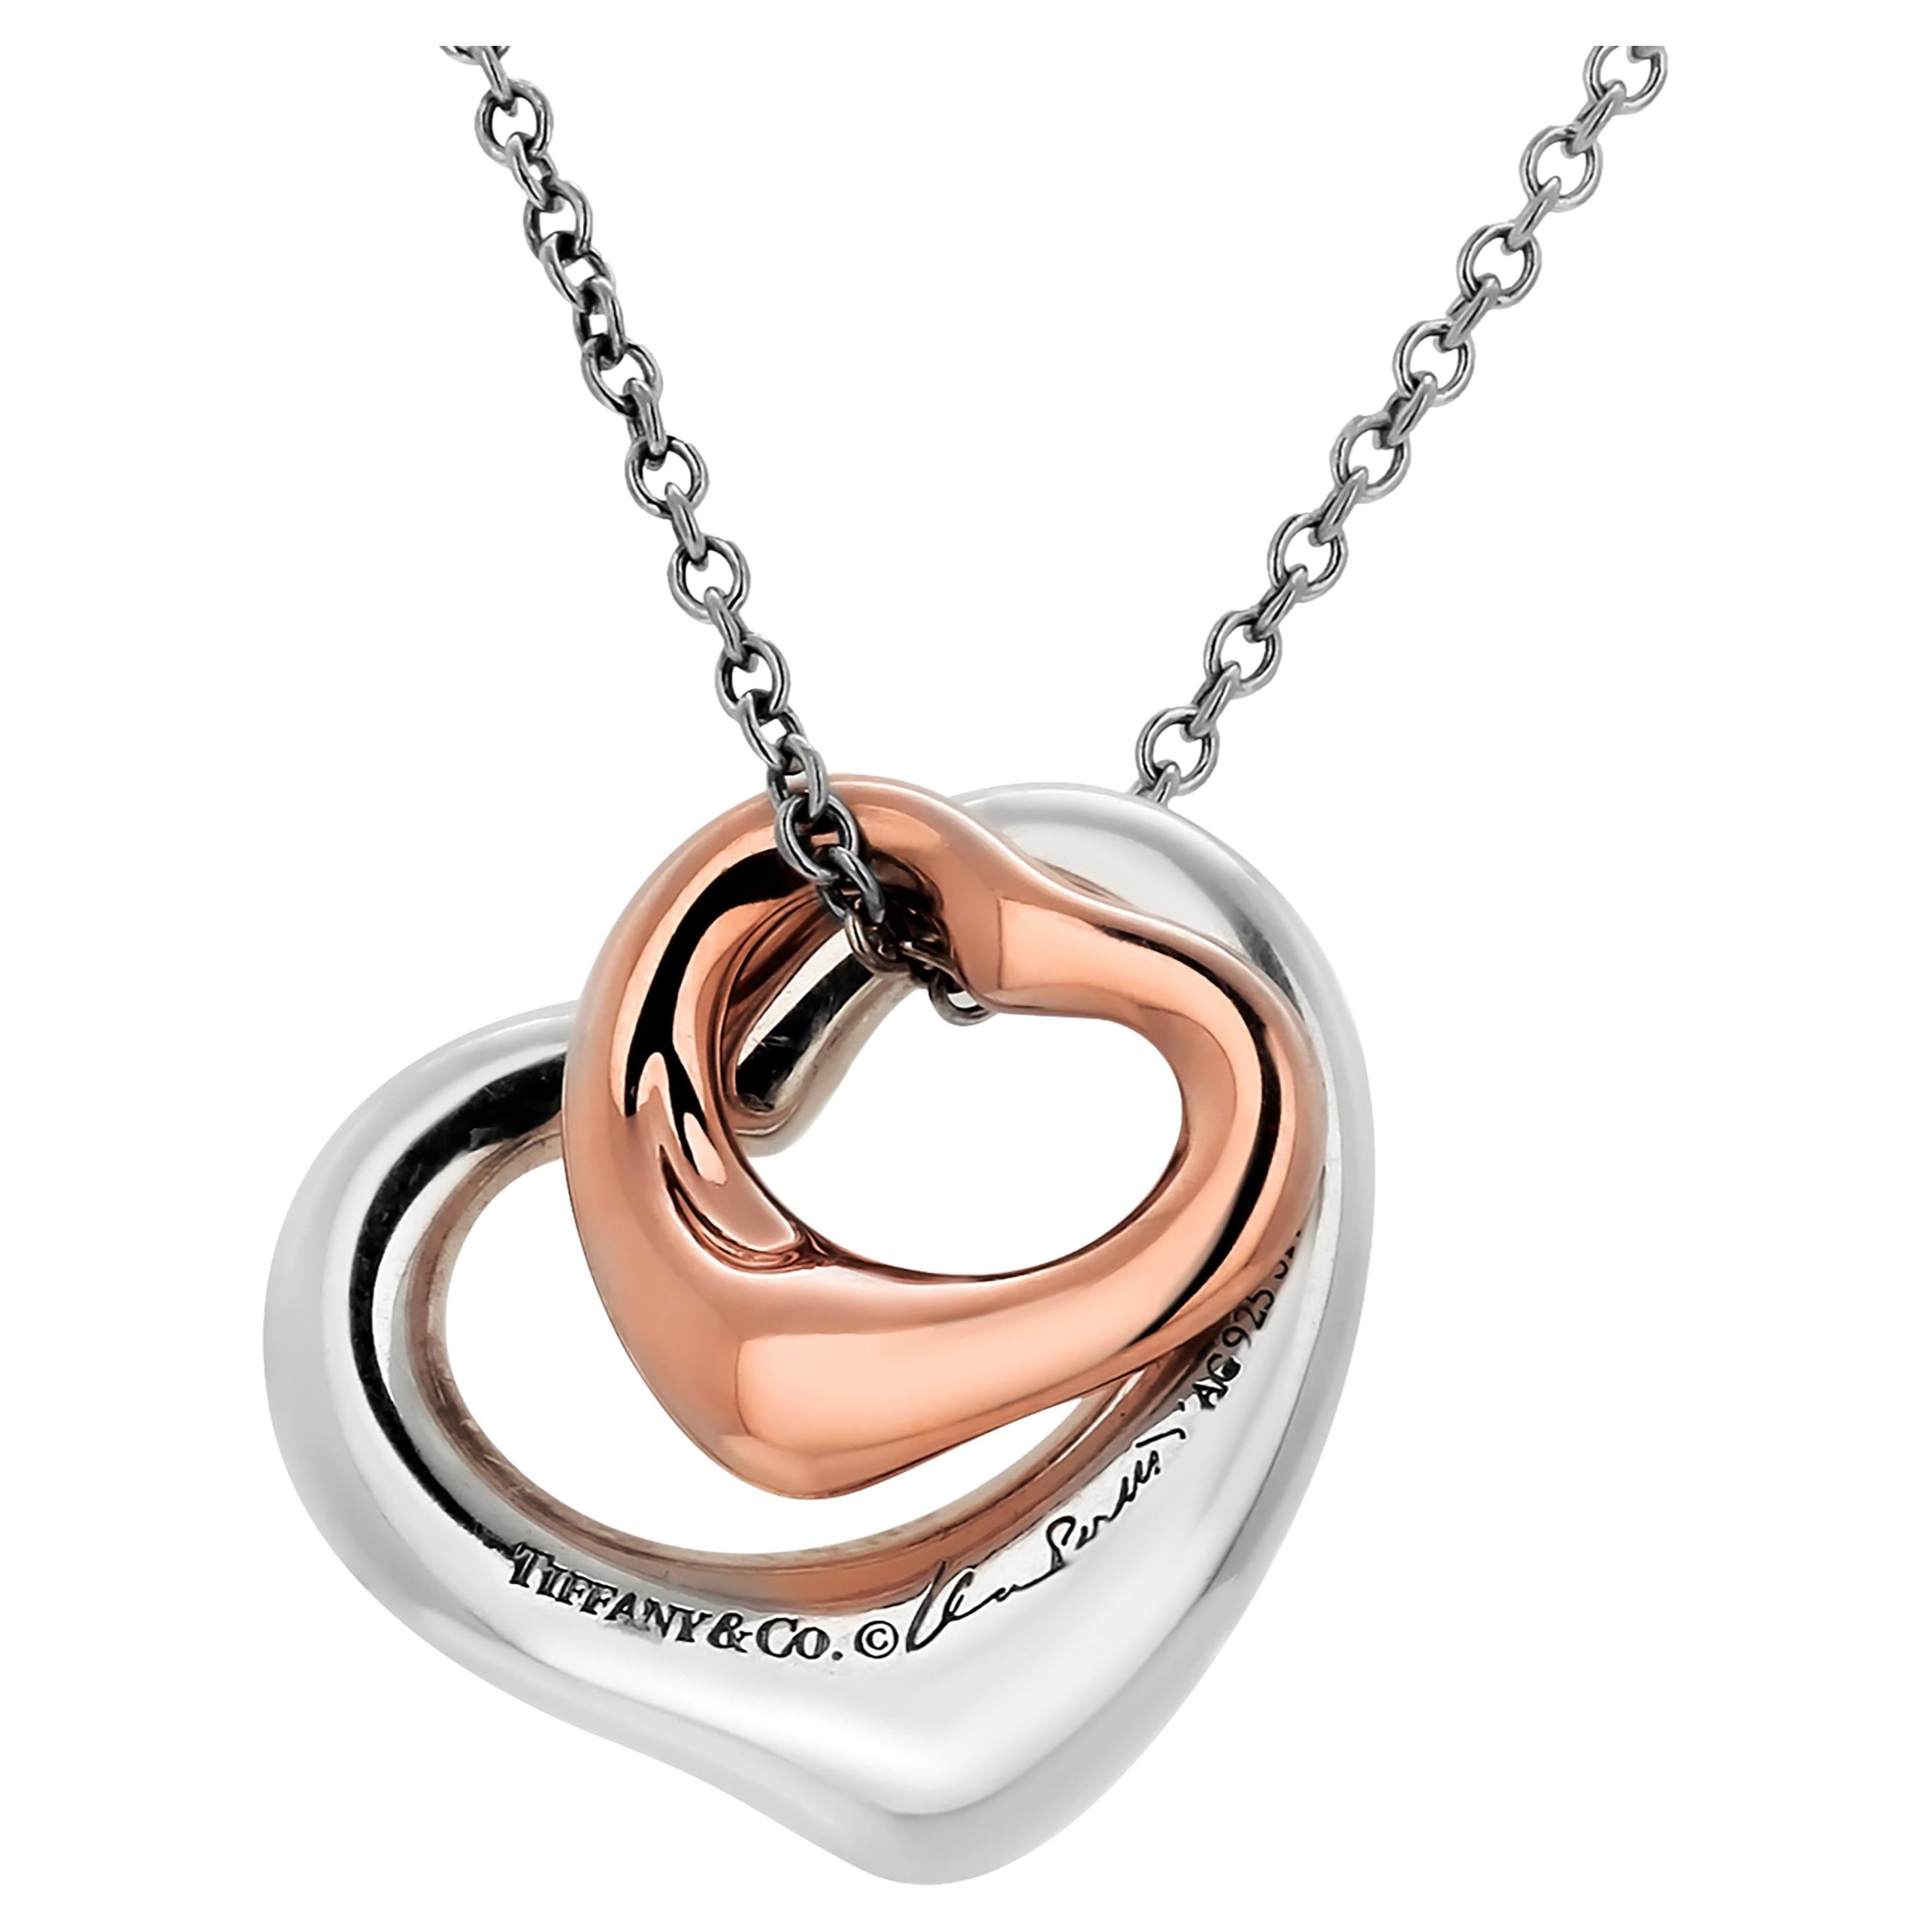 Tiffany Co. Double Open Heart Necklace 0.50 inch Rose Gold and 0.55 inch Silver